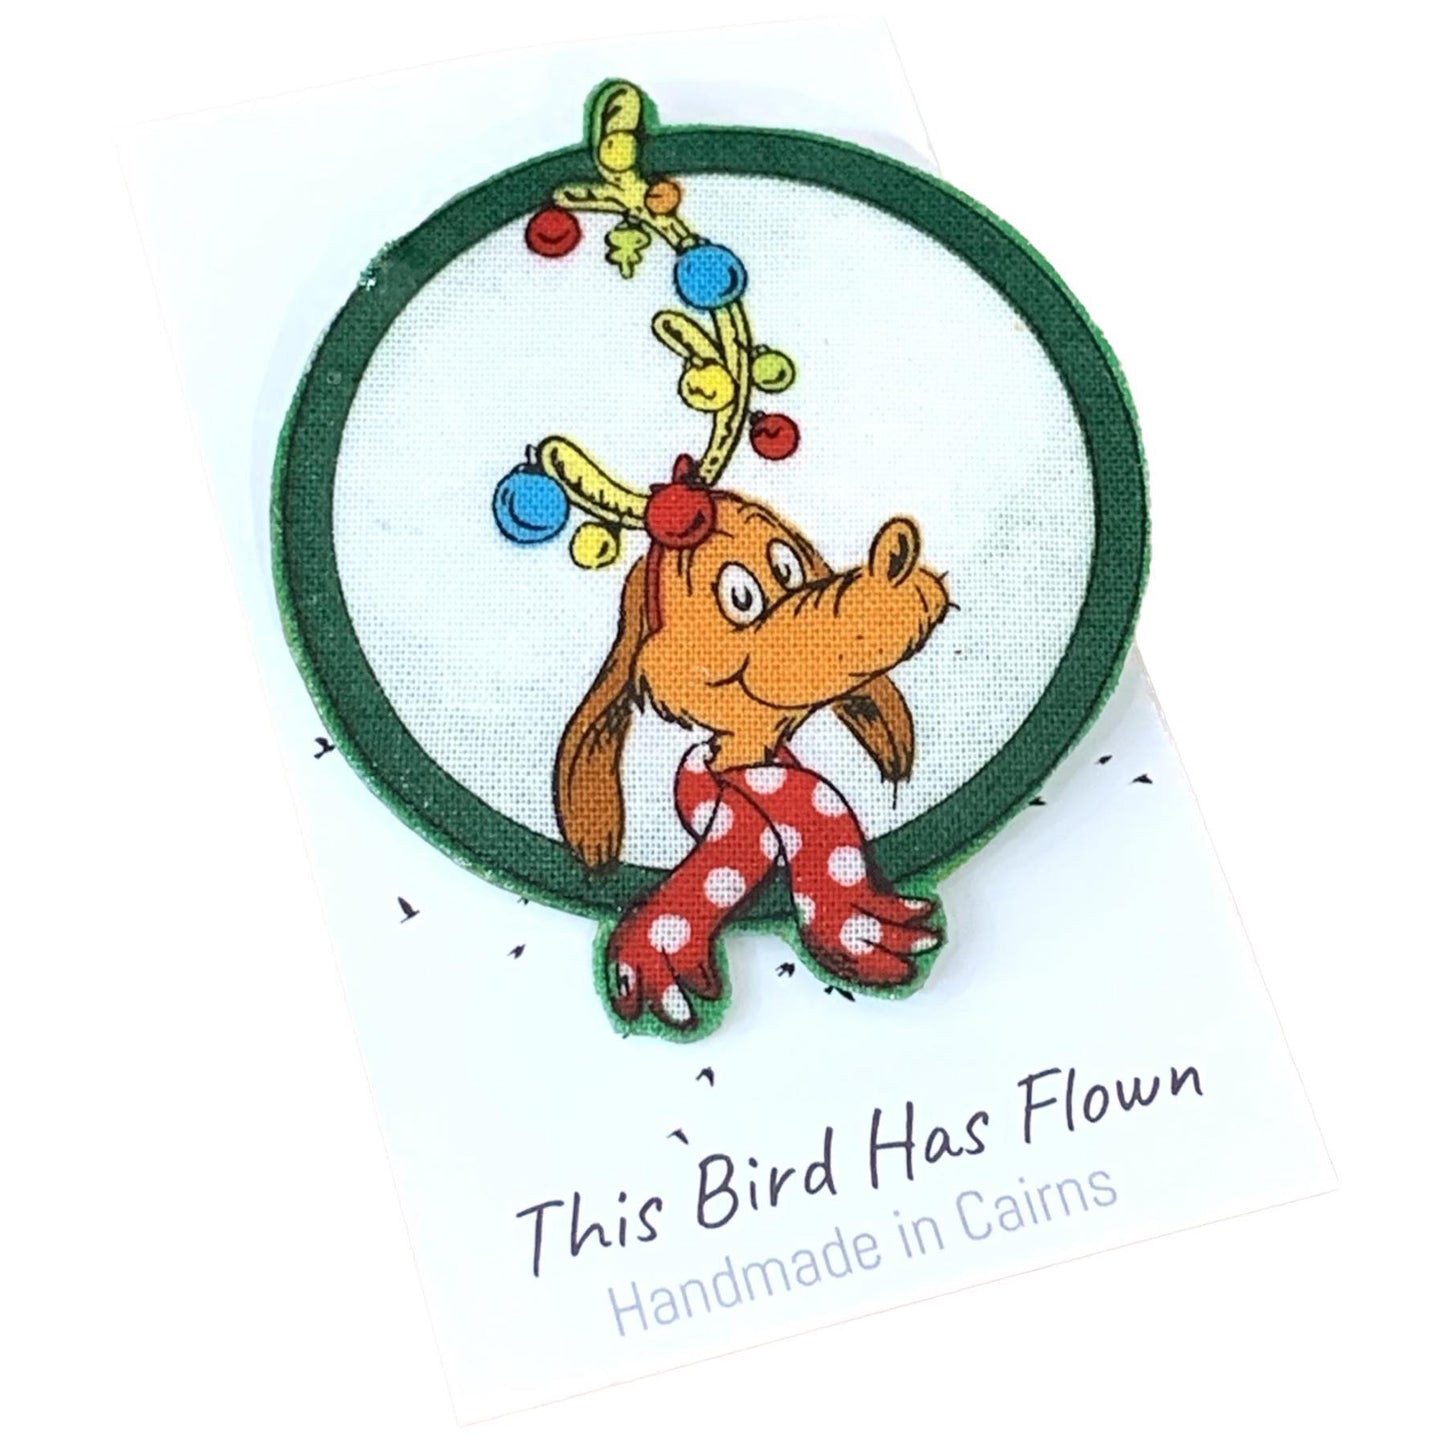 THIS BIRD HAS FLOWN- "Max" from the Grinch Fabric Remnant Christmas Brooch